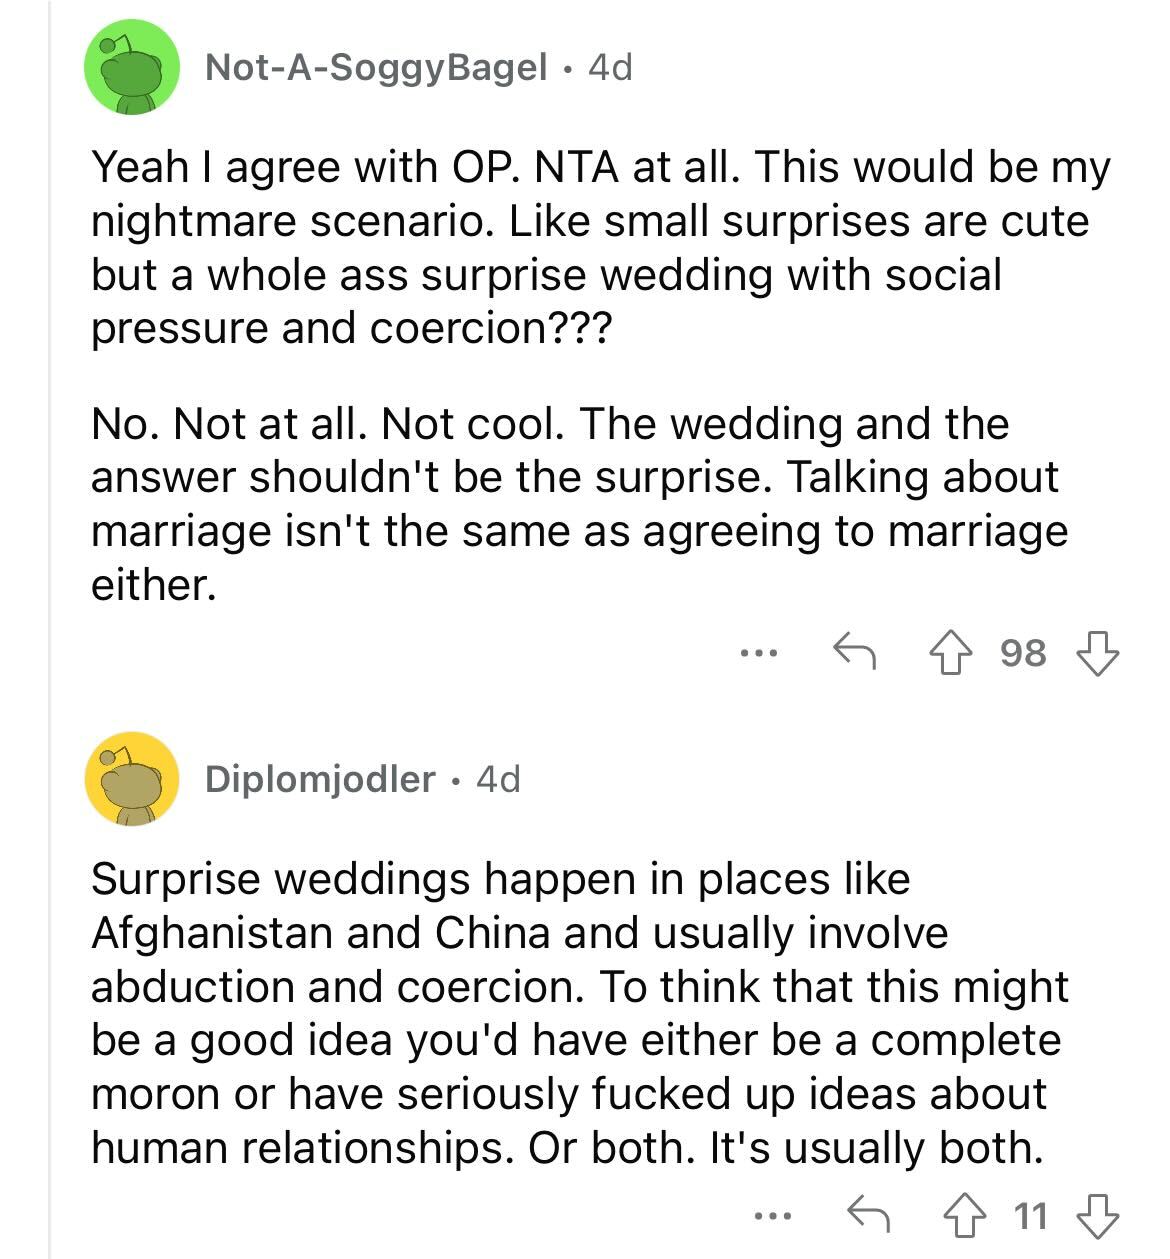 am i the asshole thread on reddit - angle - NotASoggy Bagel 4d Yeah I agree with Op. Nta at all. This would be my nightmare scenario. small surprises are cute but a whole ass surprise wedding with social pressure and coercion??? No. Not at all. Not cool. 